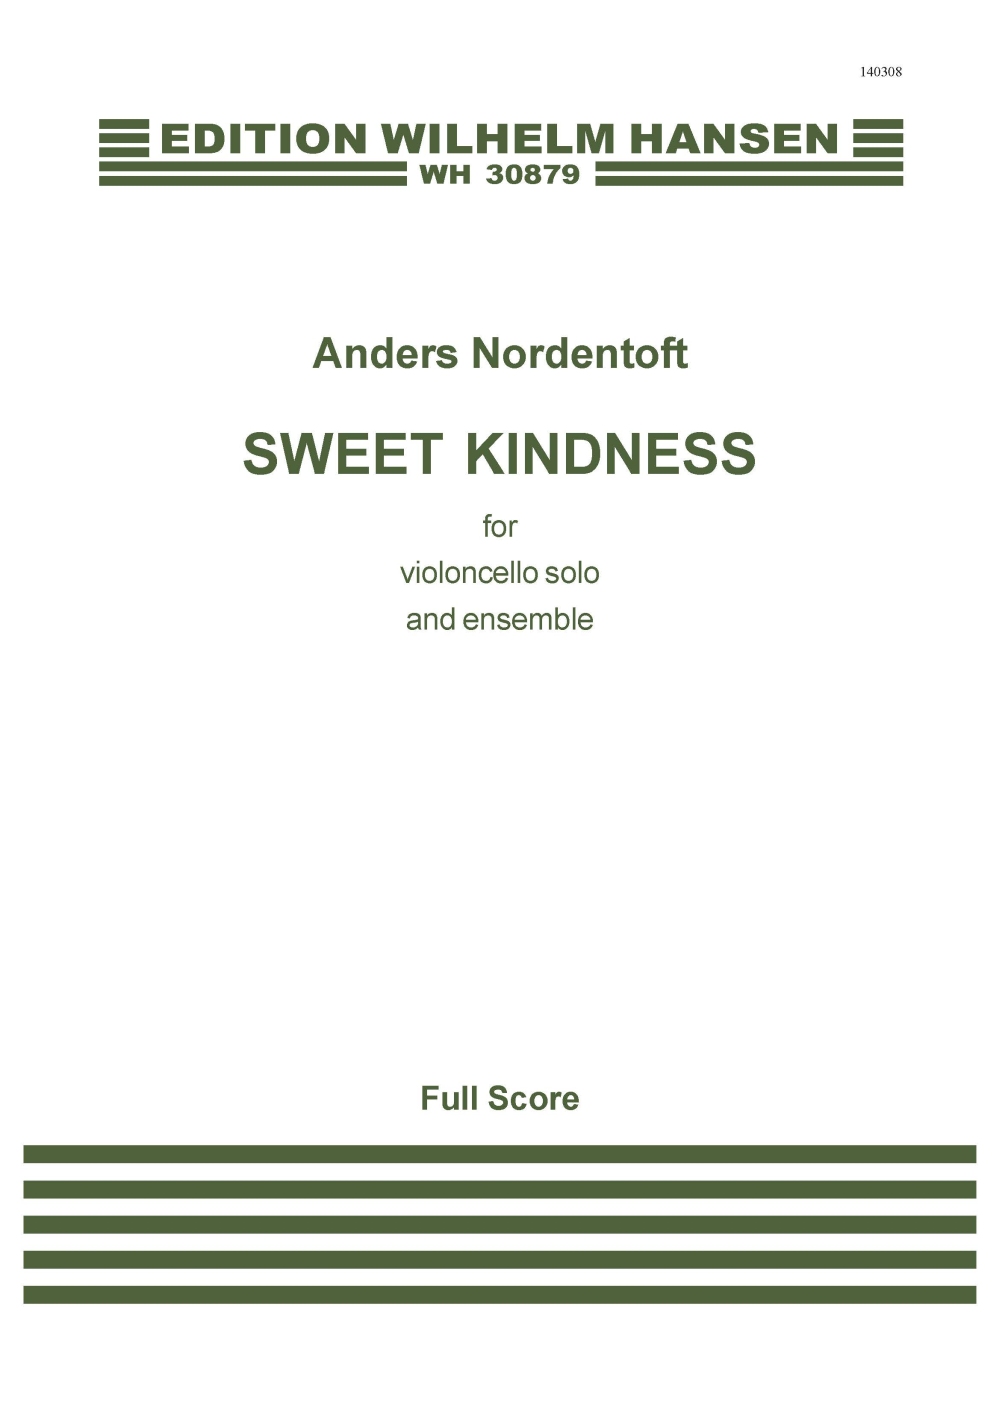 Anders Nordentoft: Sweet Kindness: Orchestra: Score